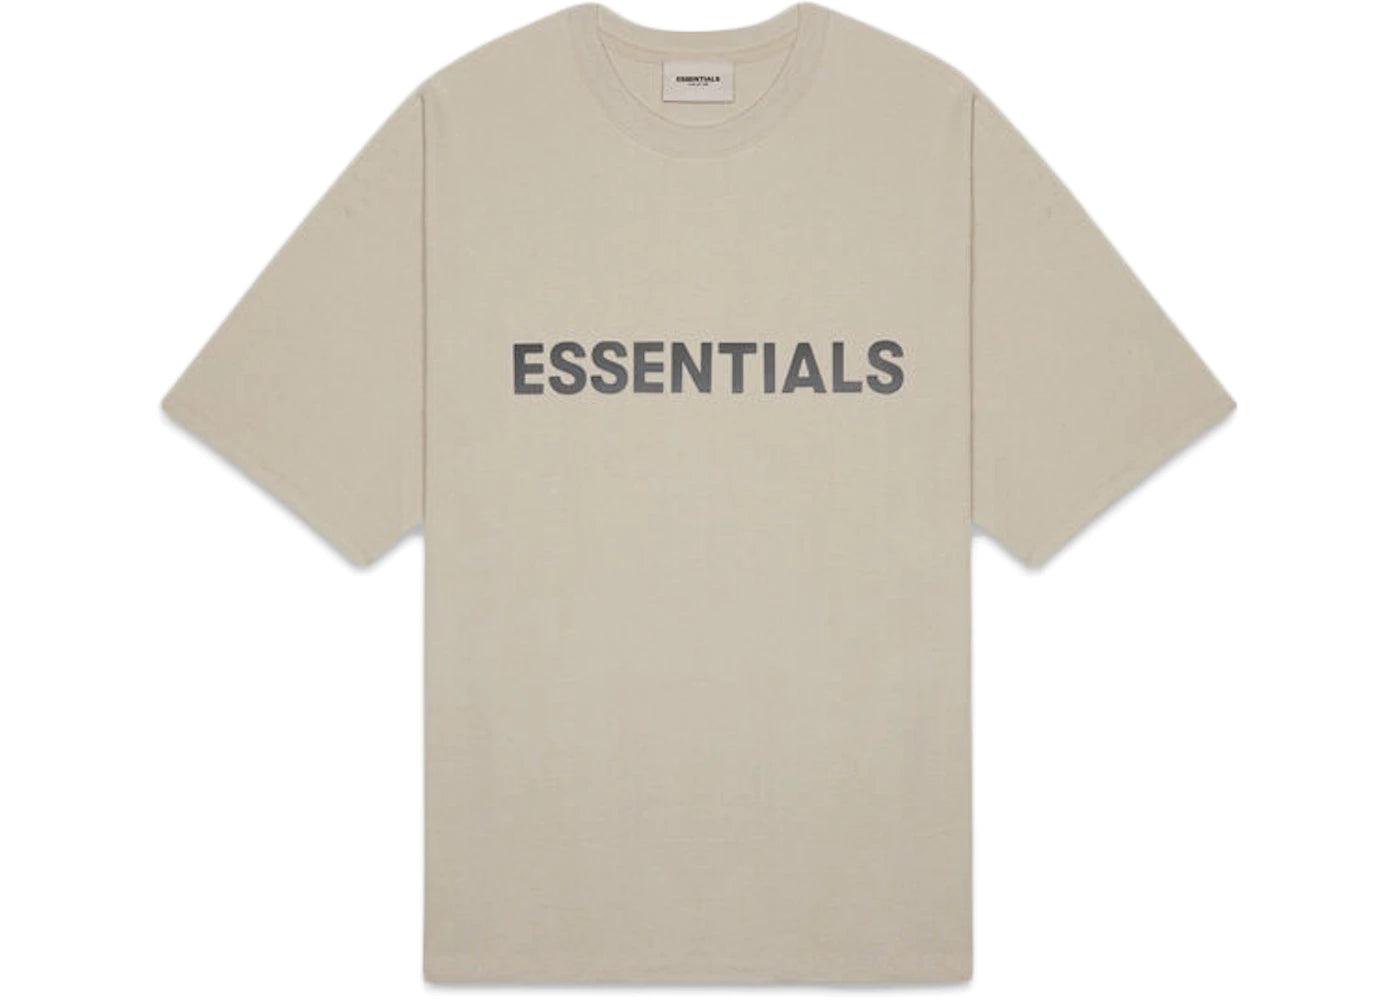 Essentials Fear Of God - Short Sleeve Tee Olive - Clique Apparel